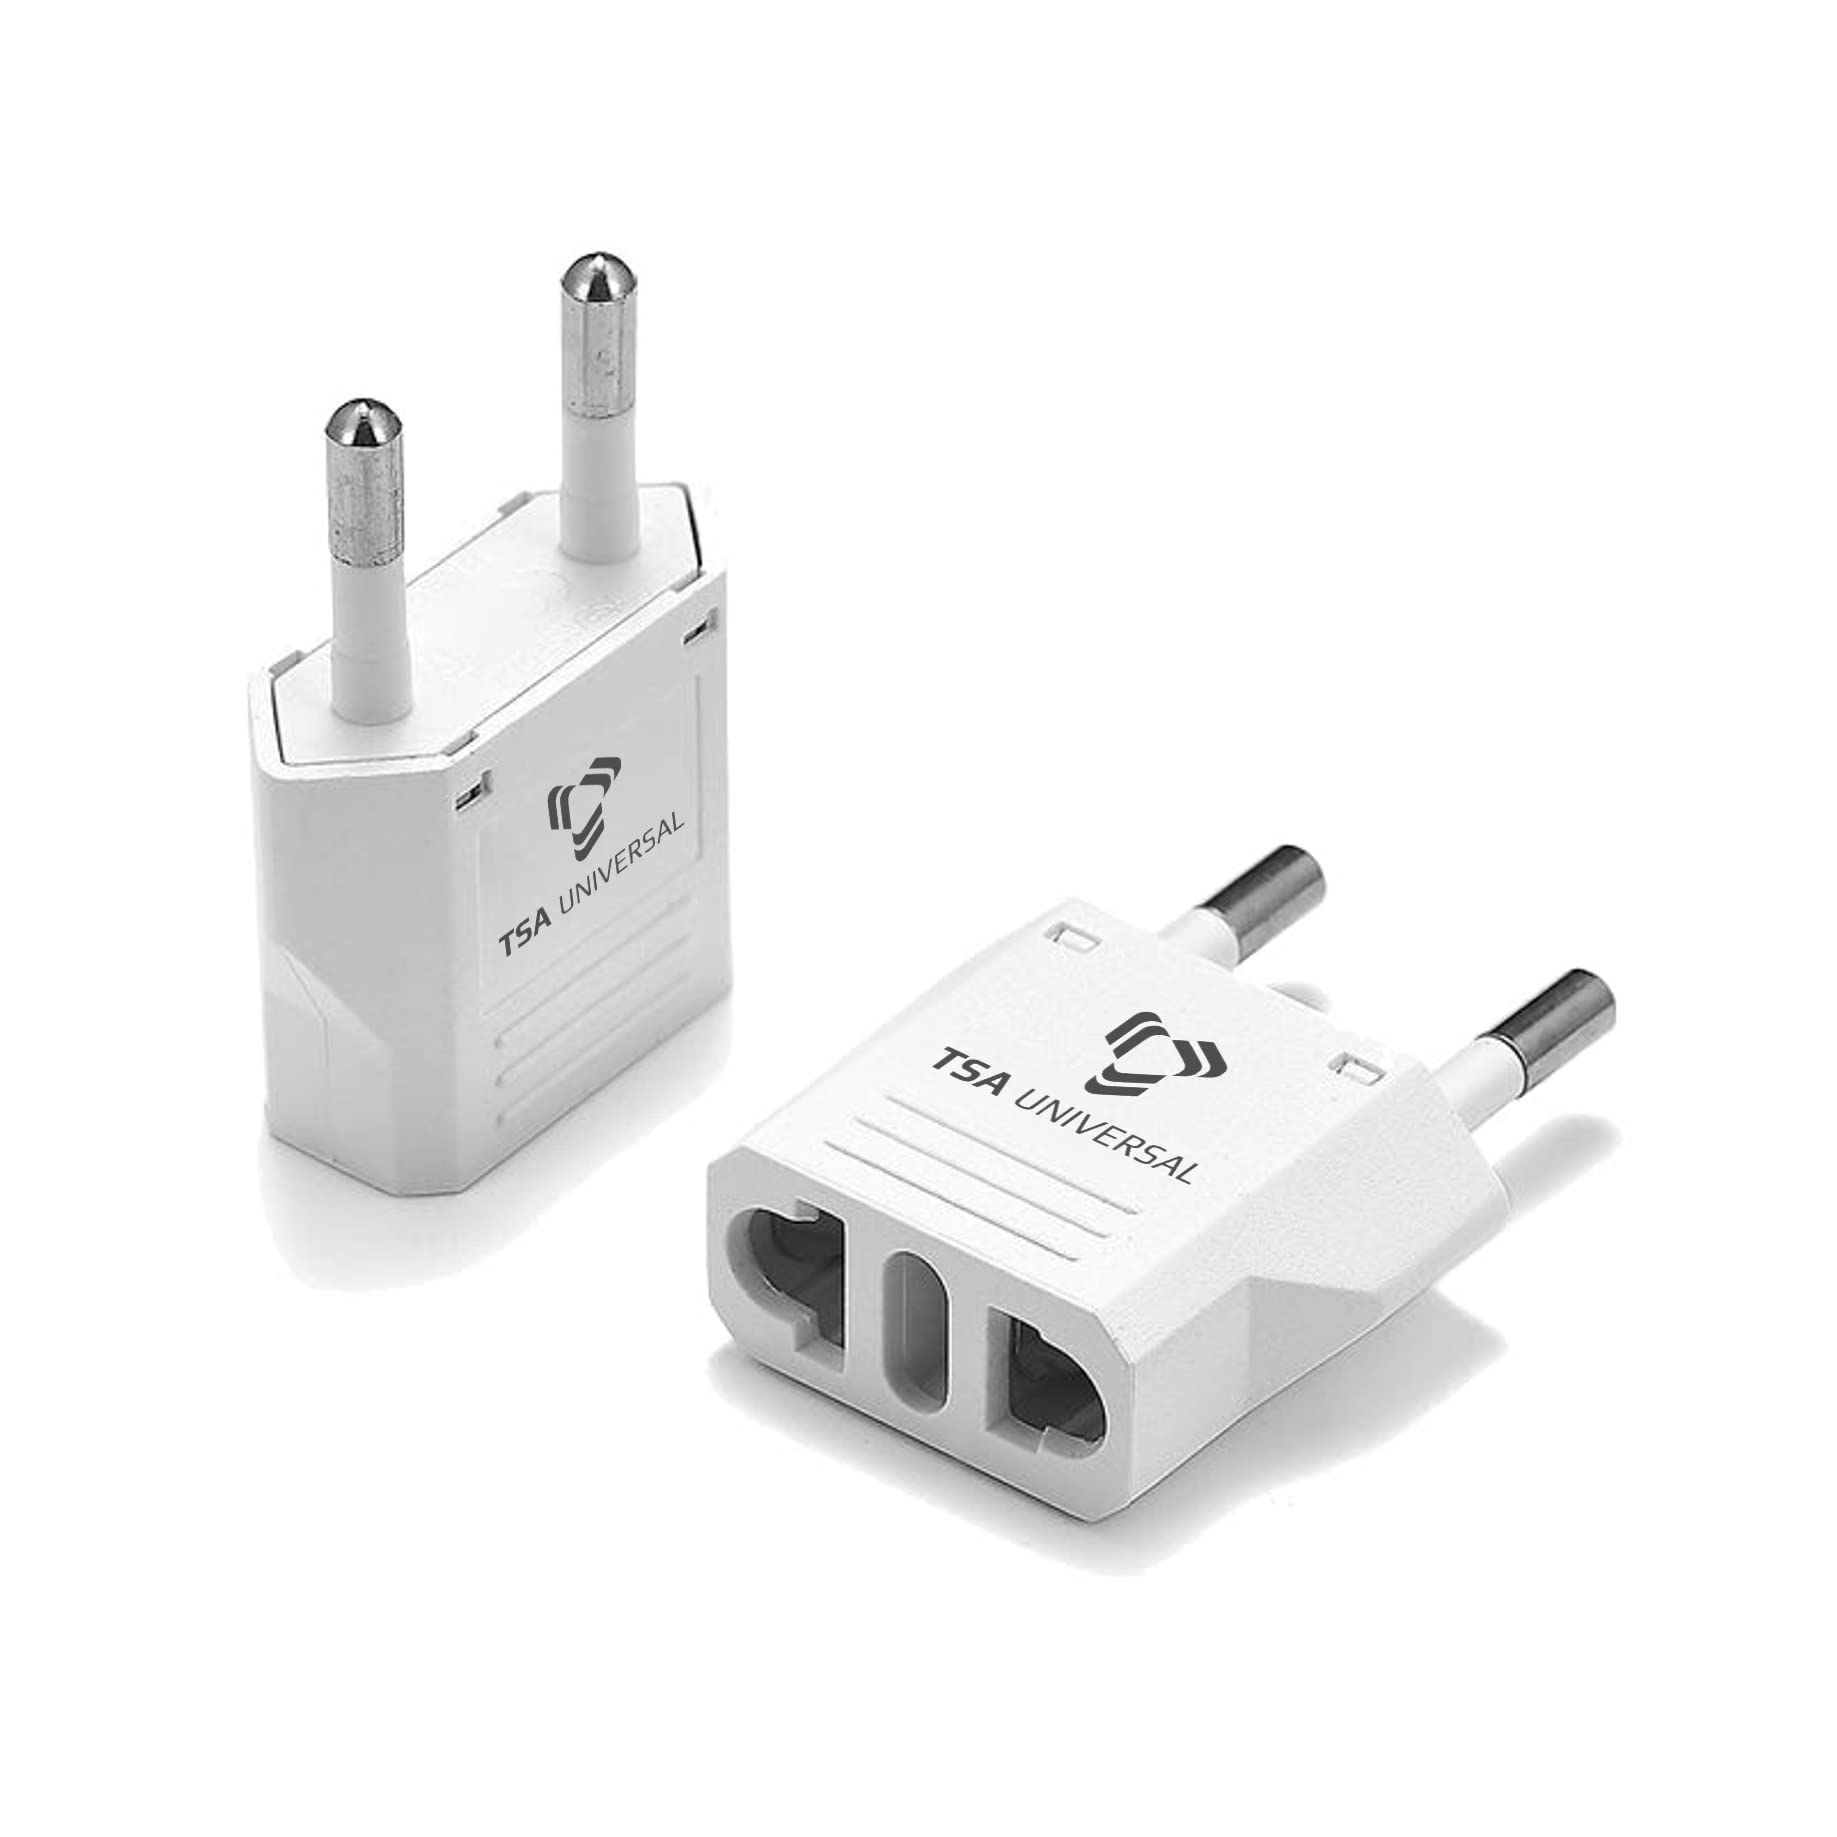 What Plug Adapter Do I Need For Iceland